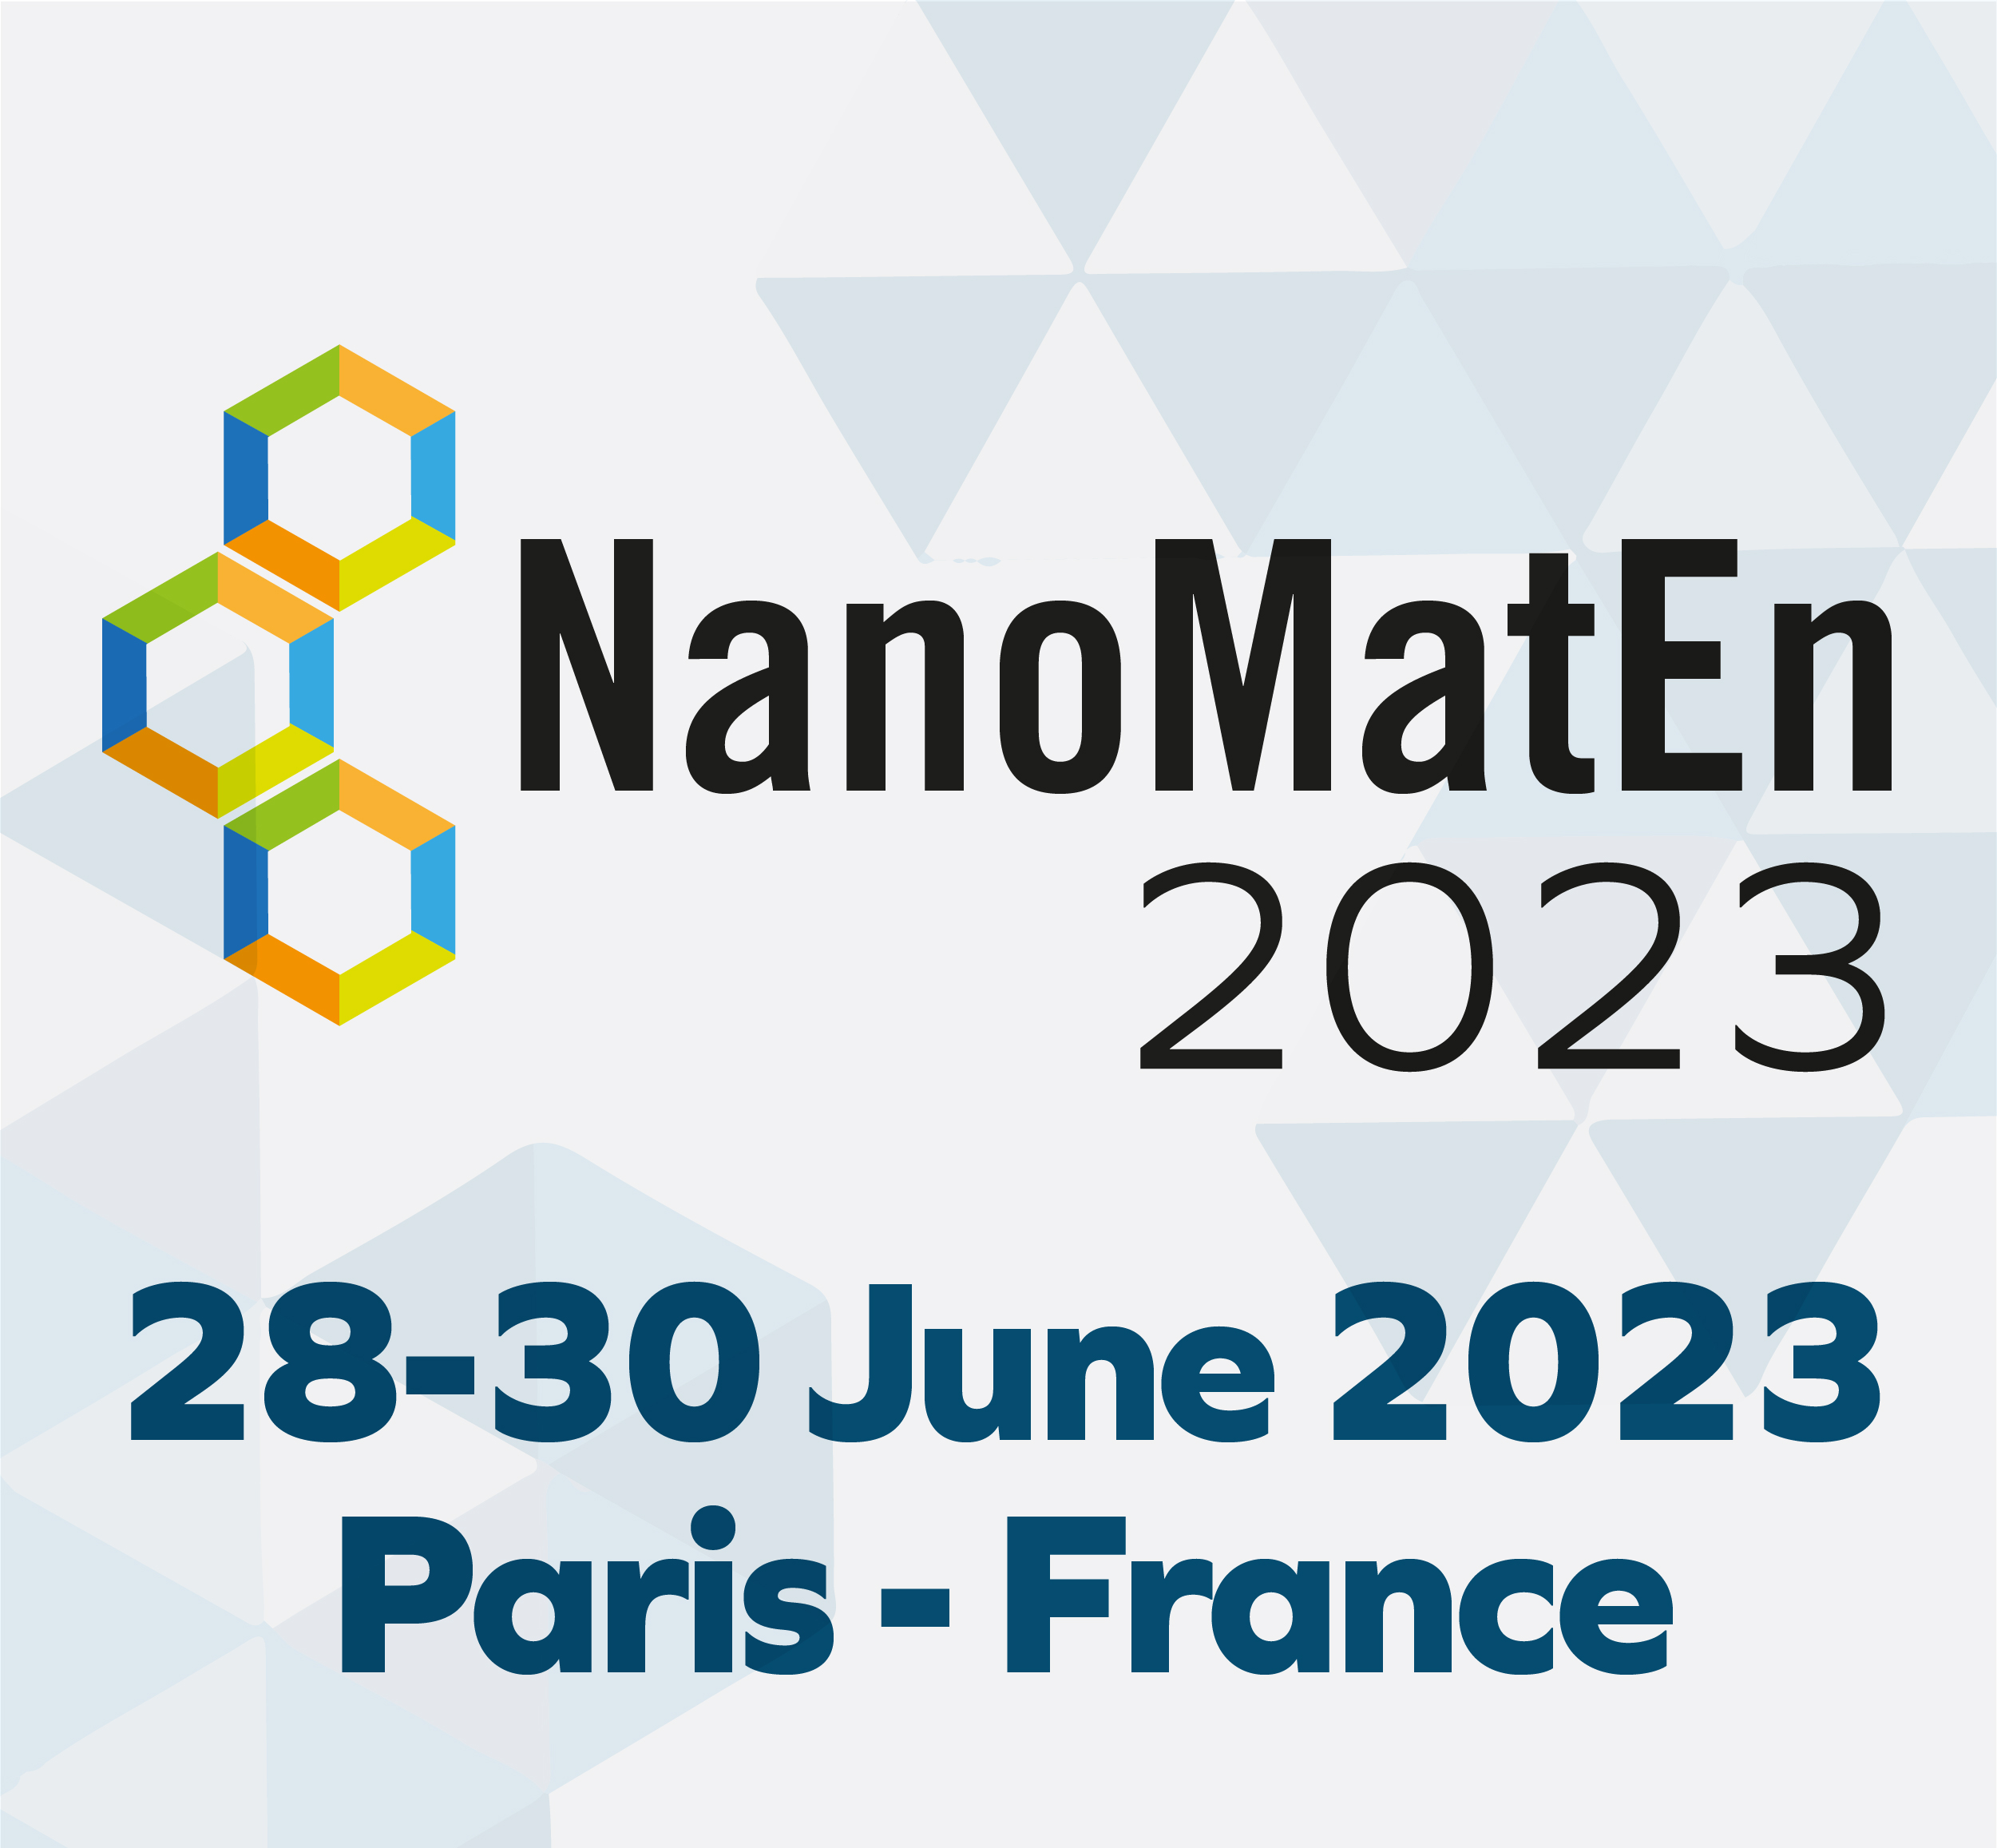 The 8th Ed. of the International conference and exhibition on NanoMaterials for Energy & Environment - NanoMatEn 2023